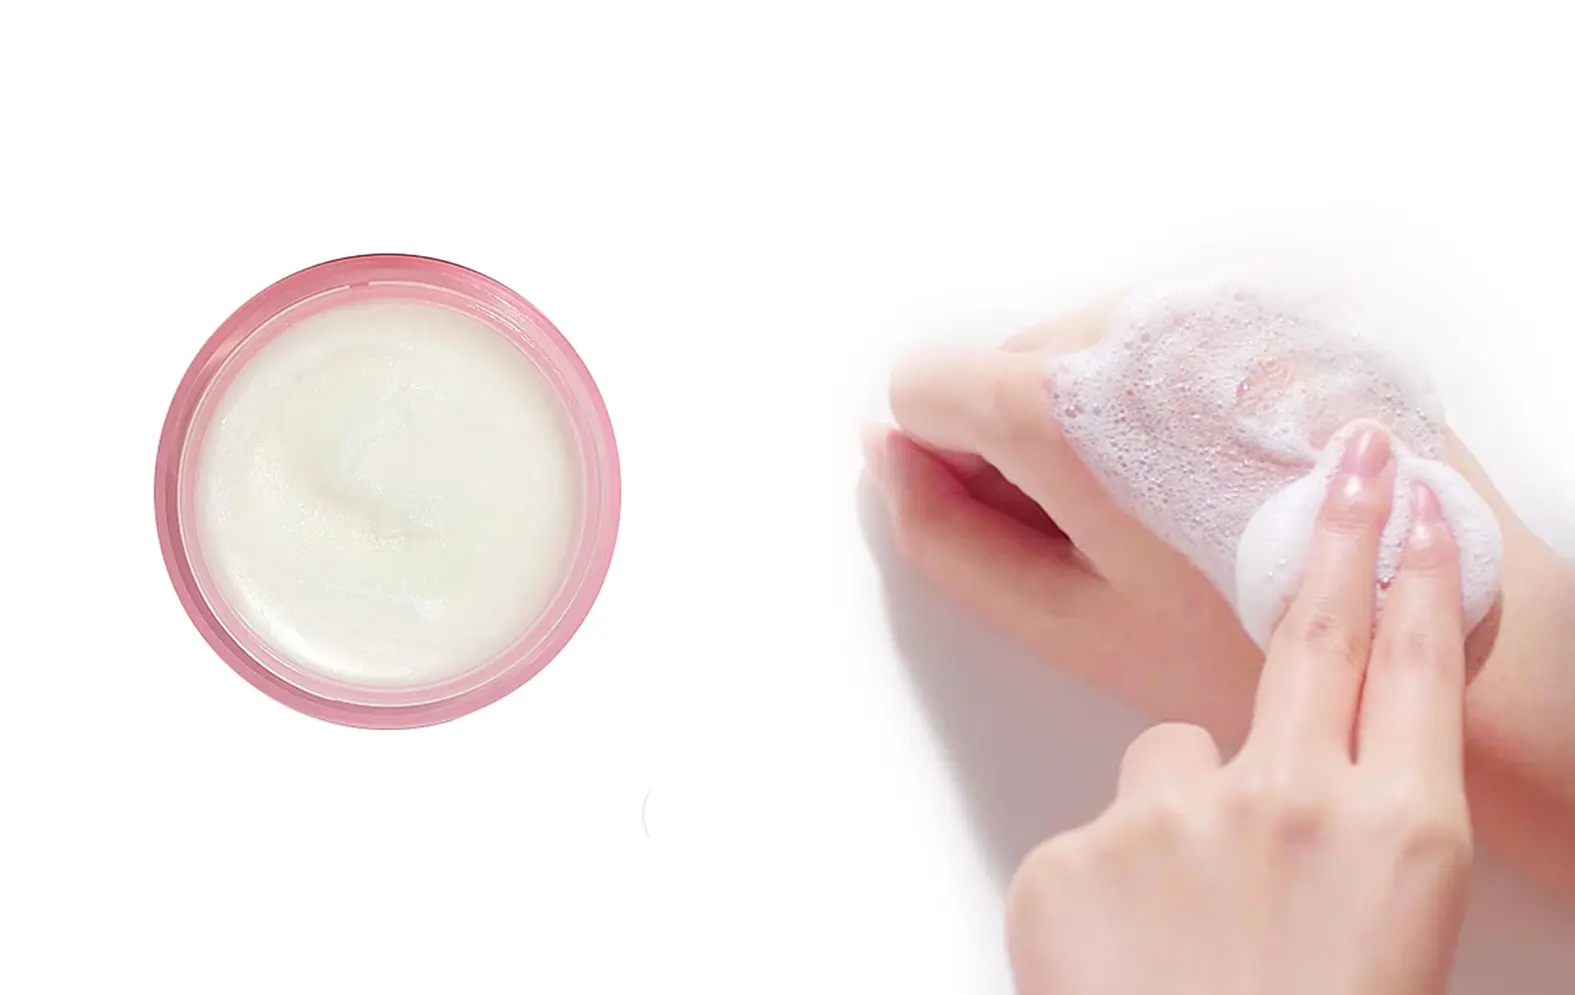 The difference between cleansing balm and water based cleansers